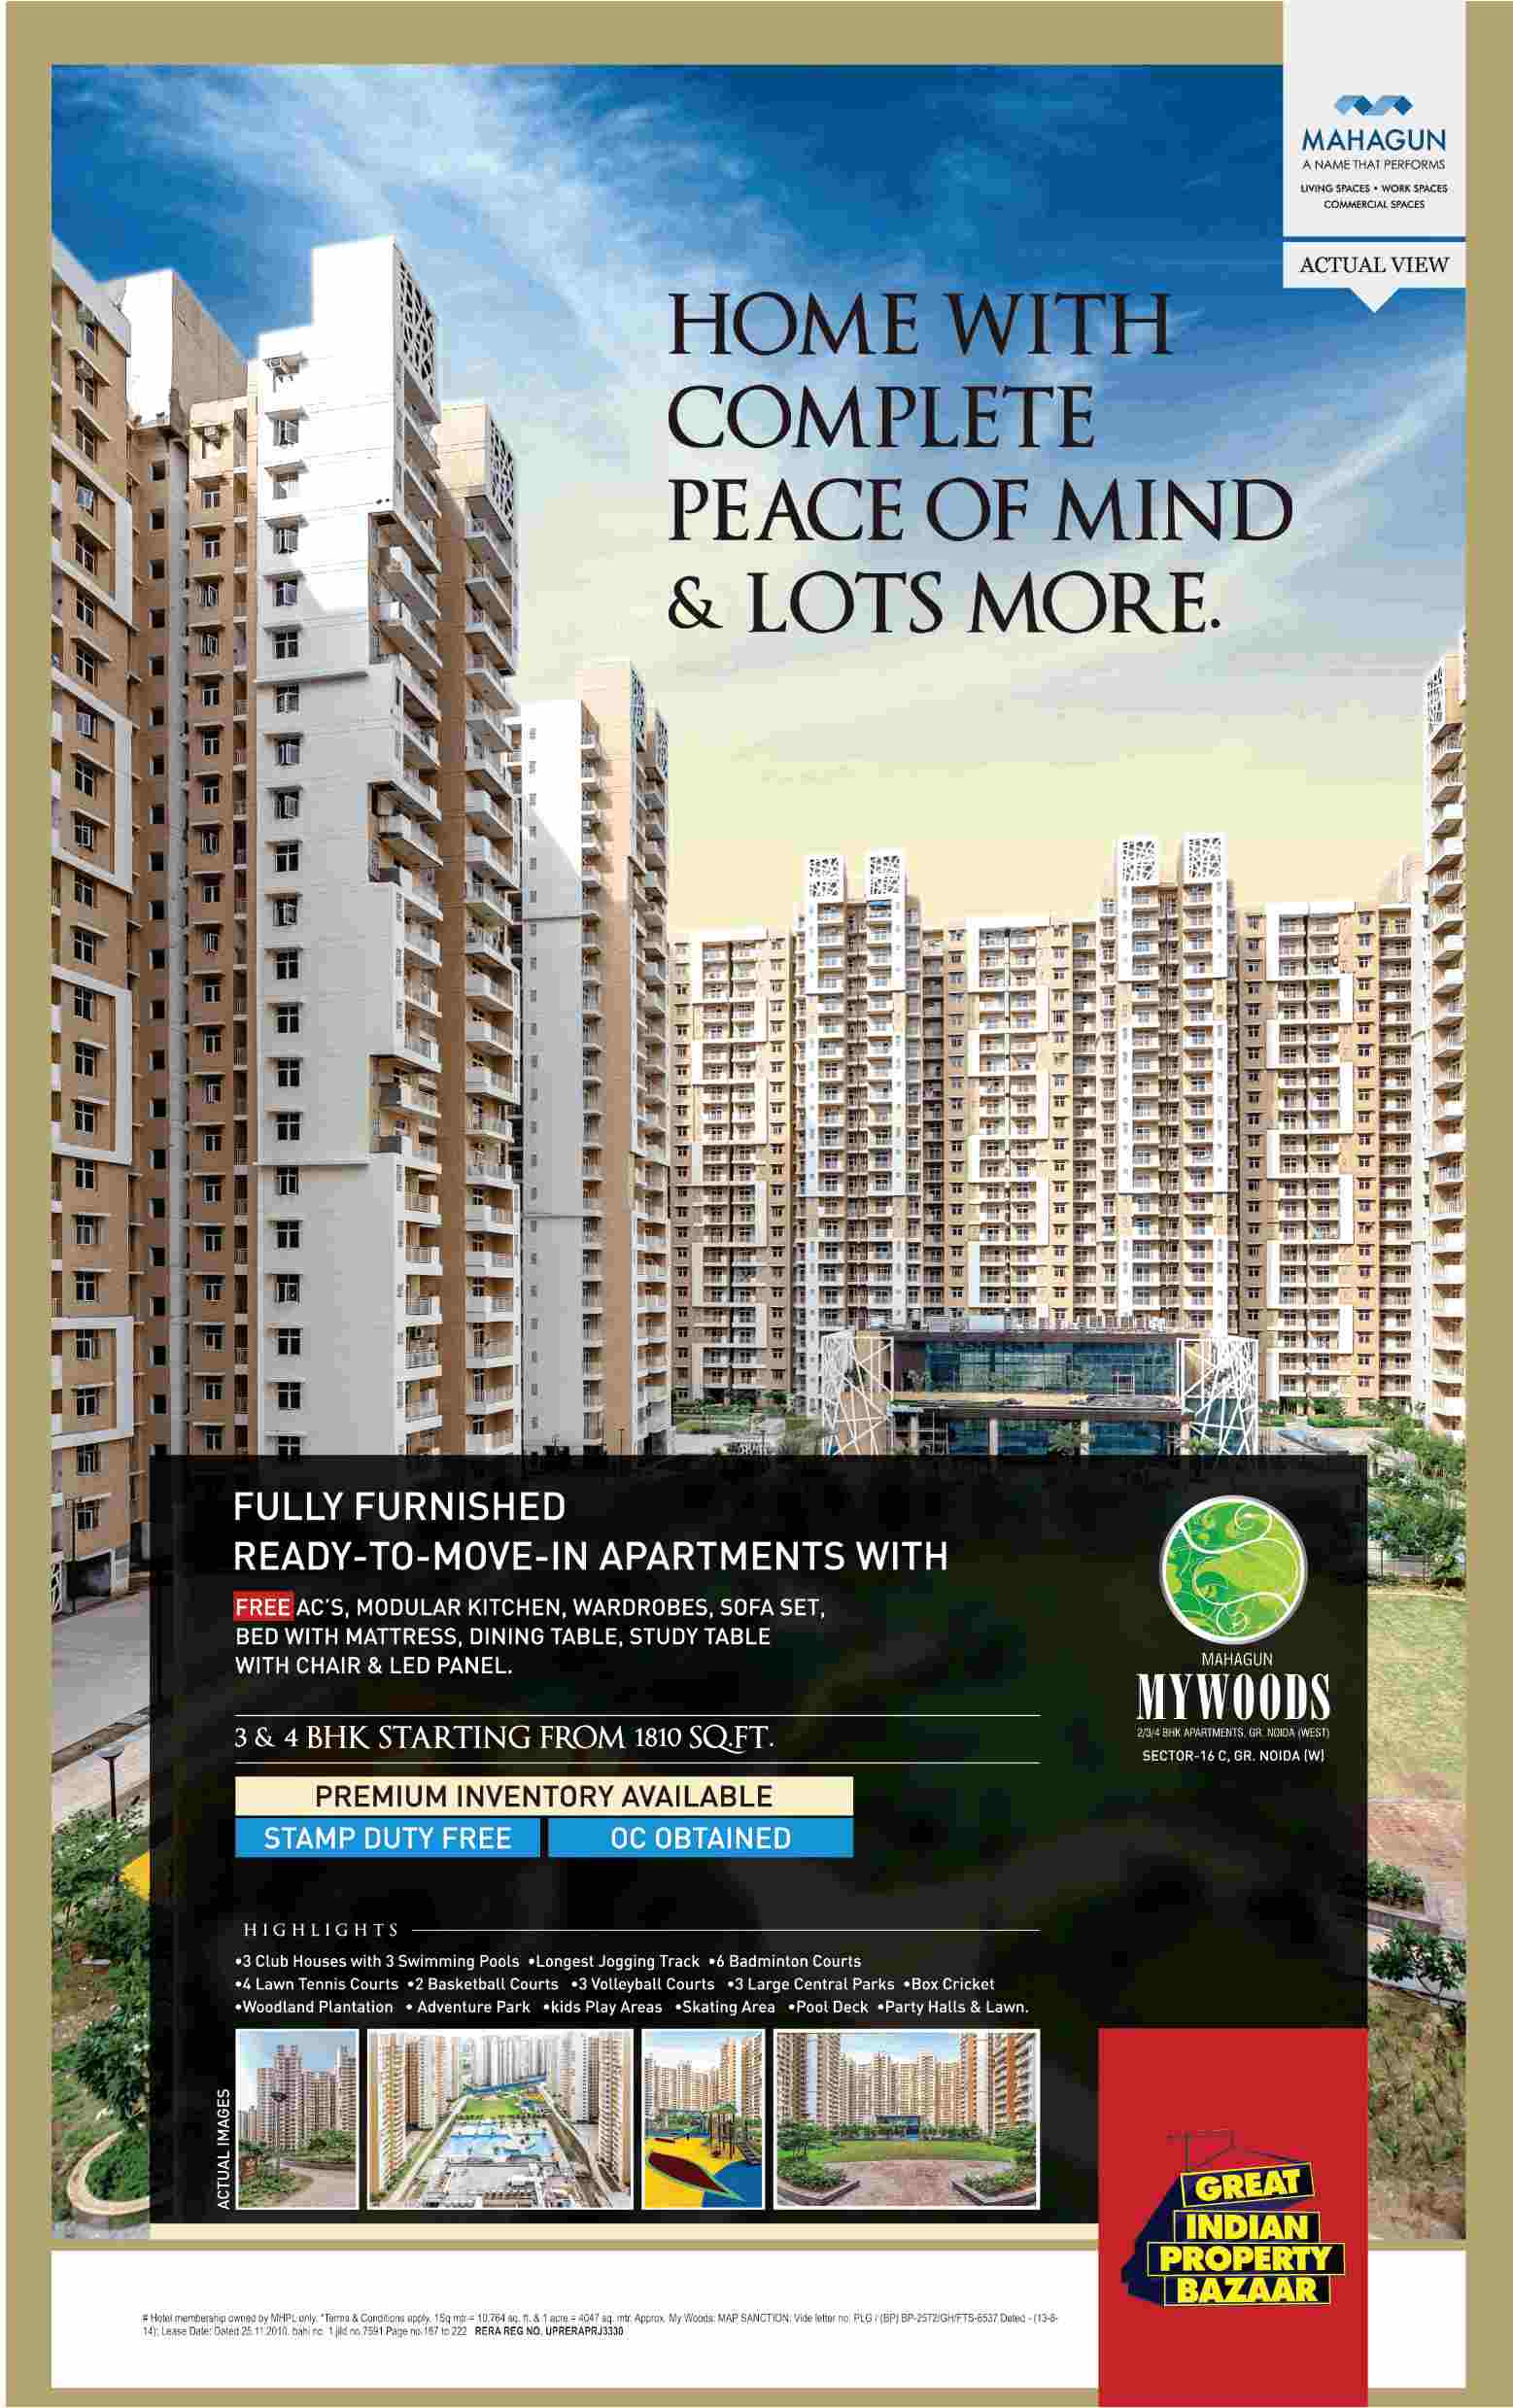 Reside in fully furnished ready to move apartments at Mahagun Mywoods in Greater Noida Update